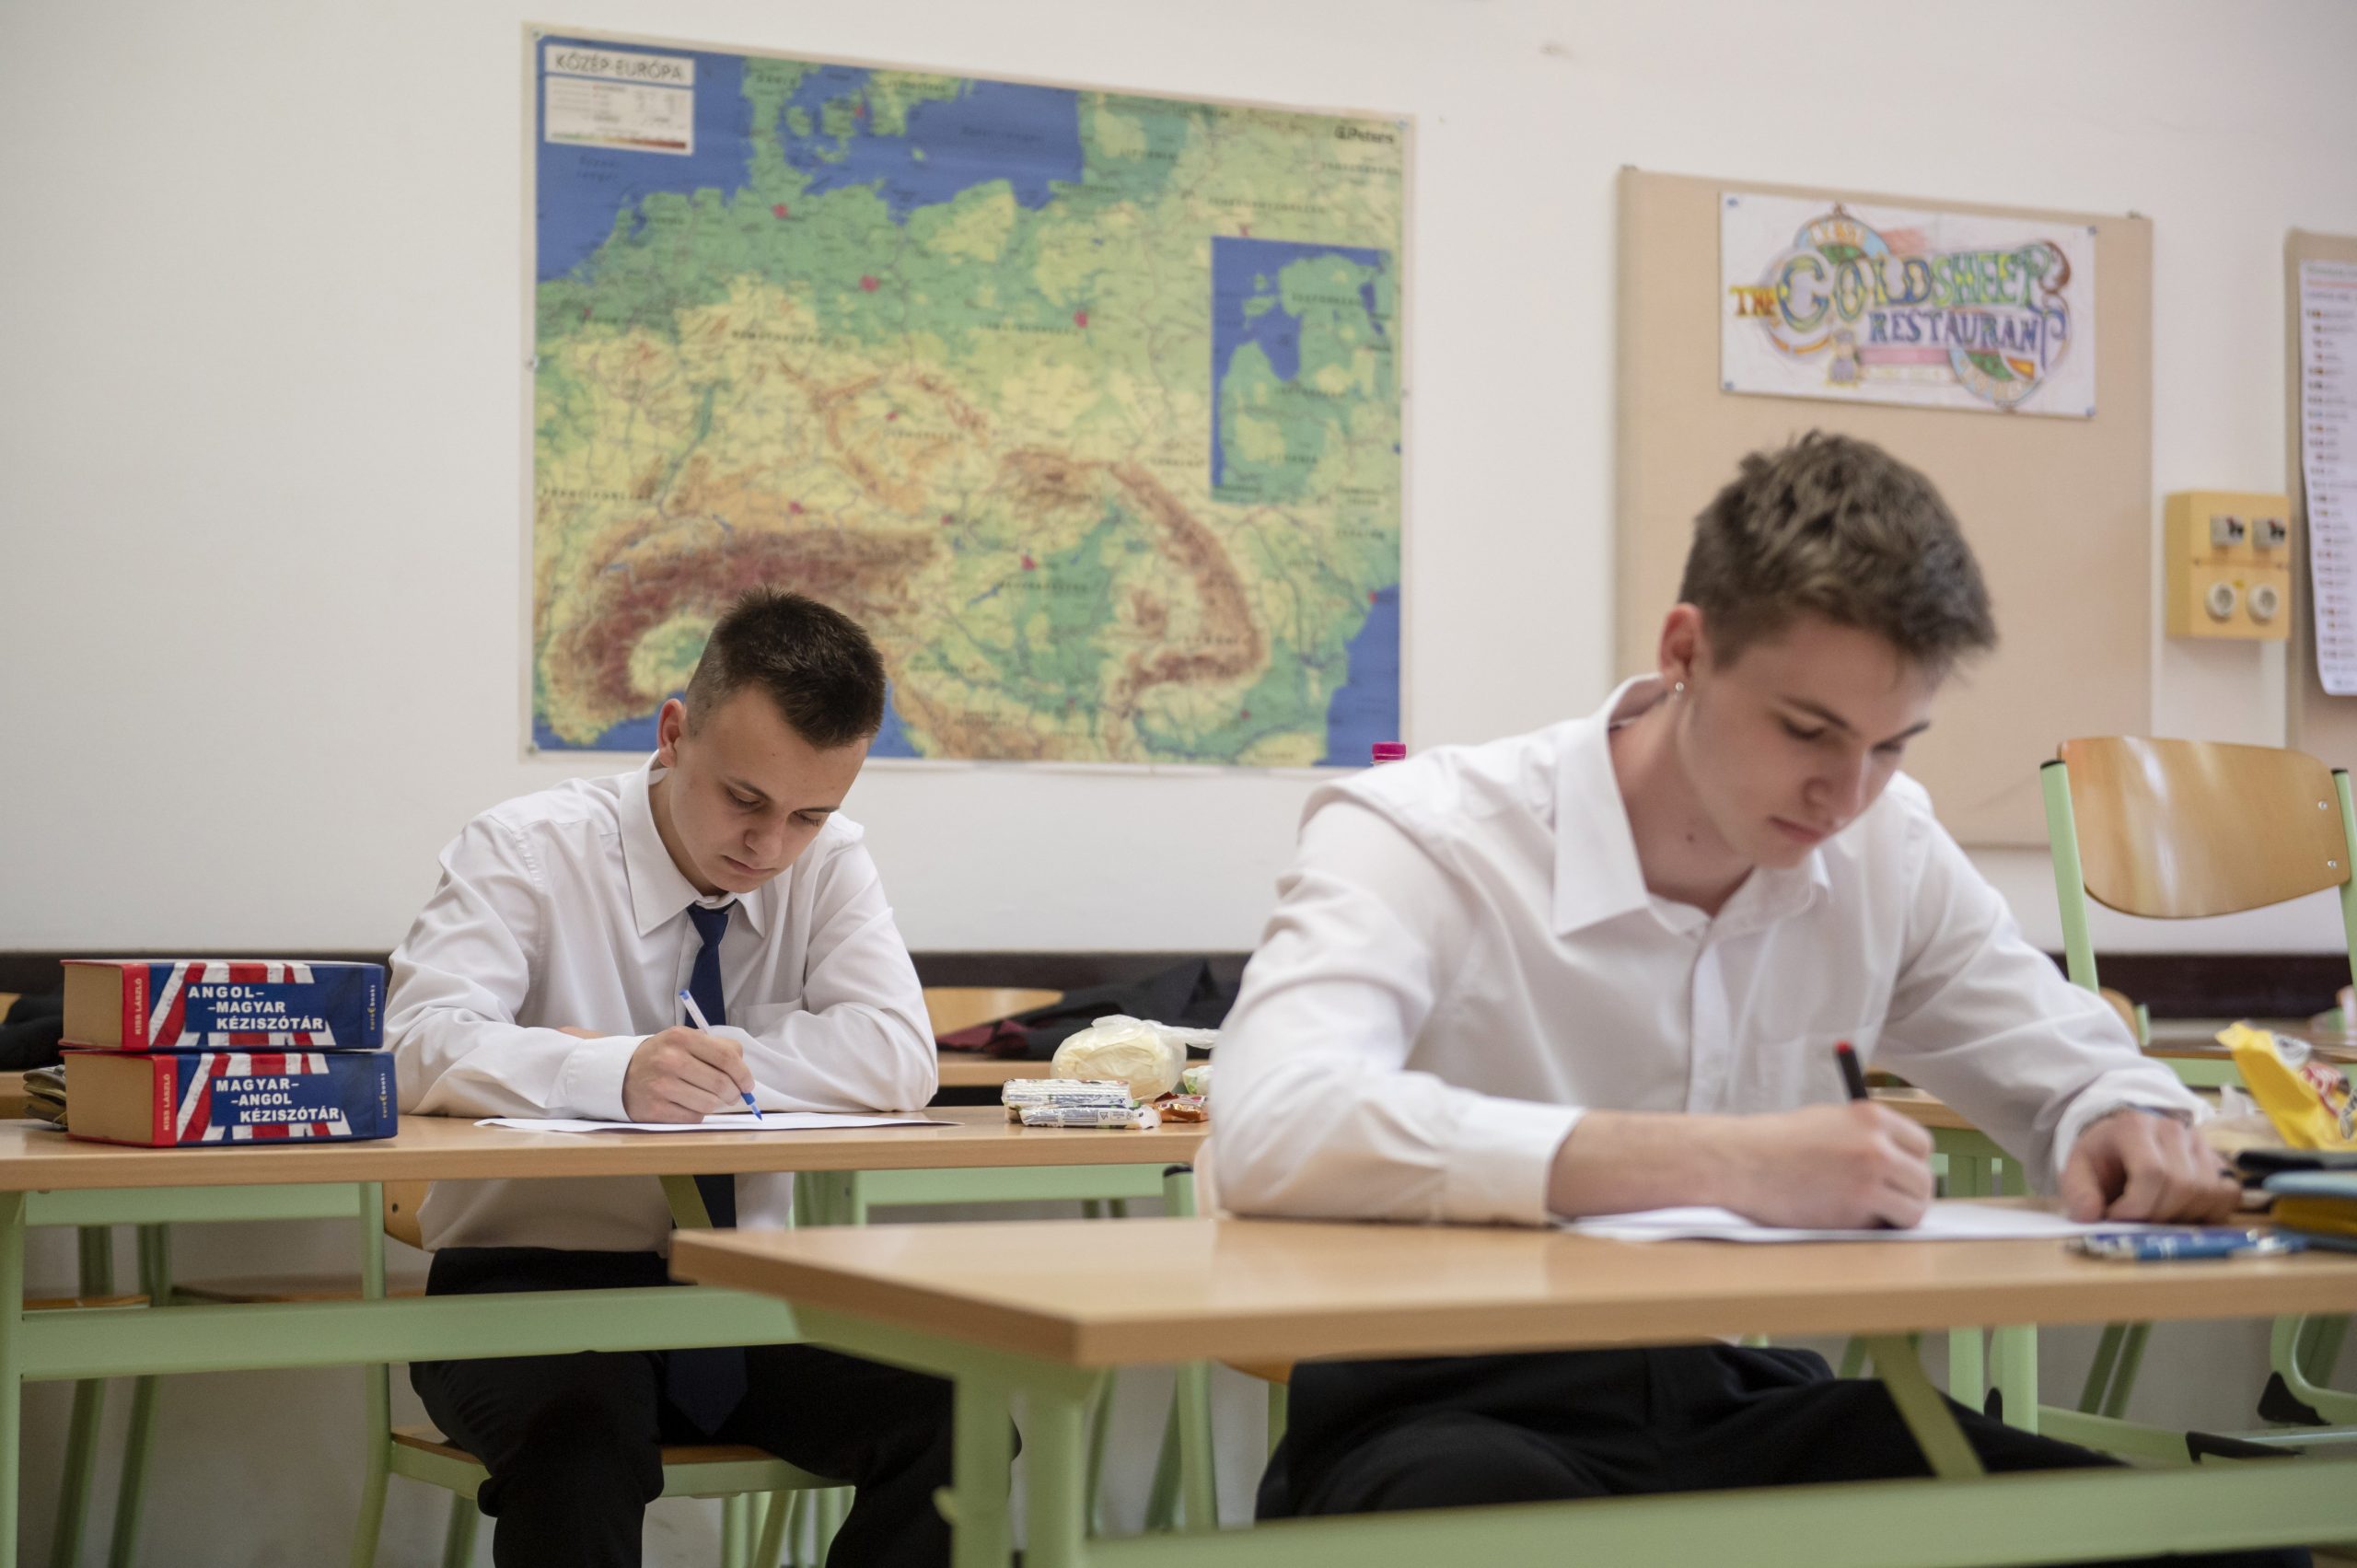 The educational performance of Hungarian students shows a marked improvement 